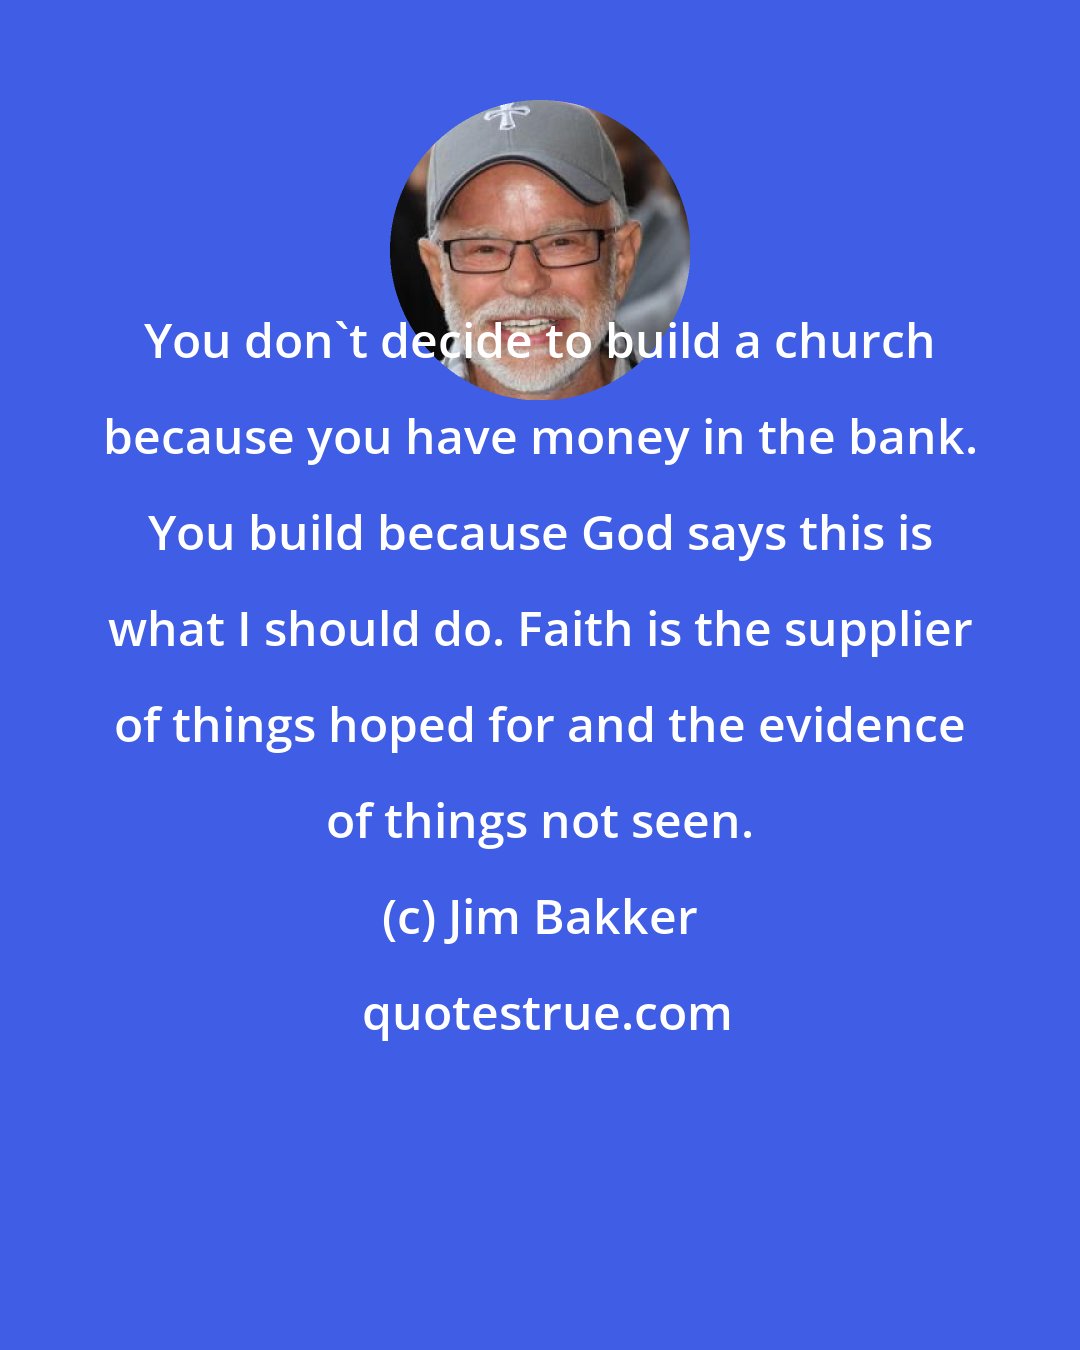 Jim Bakker: You don't decide to build a church because you have money in the bank. You build because God says this is what I should do. Faith is the supplier of things hoped for and the evidence of things not seen.